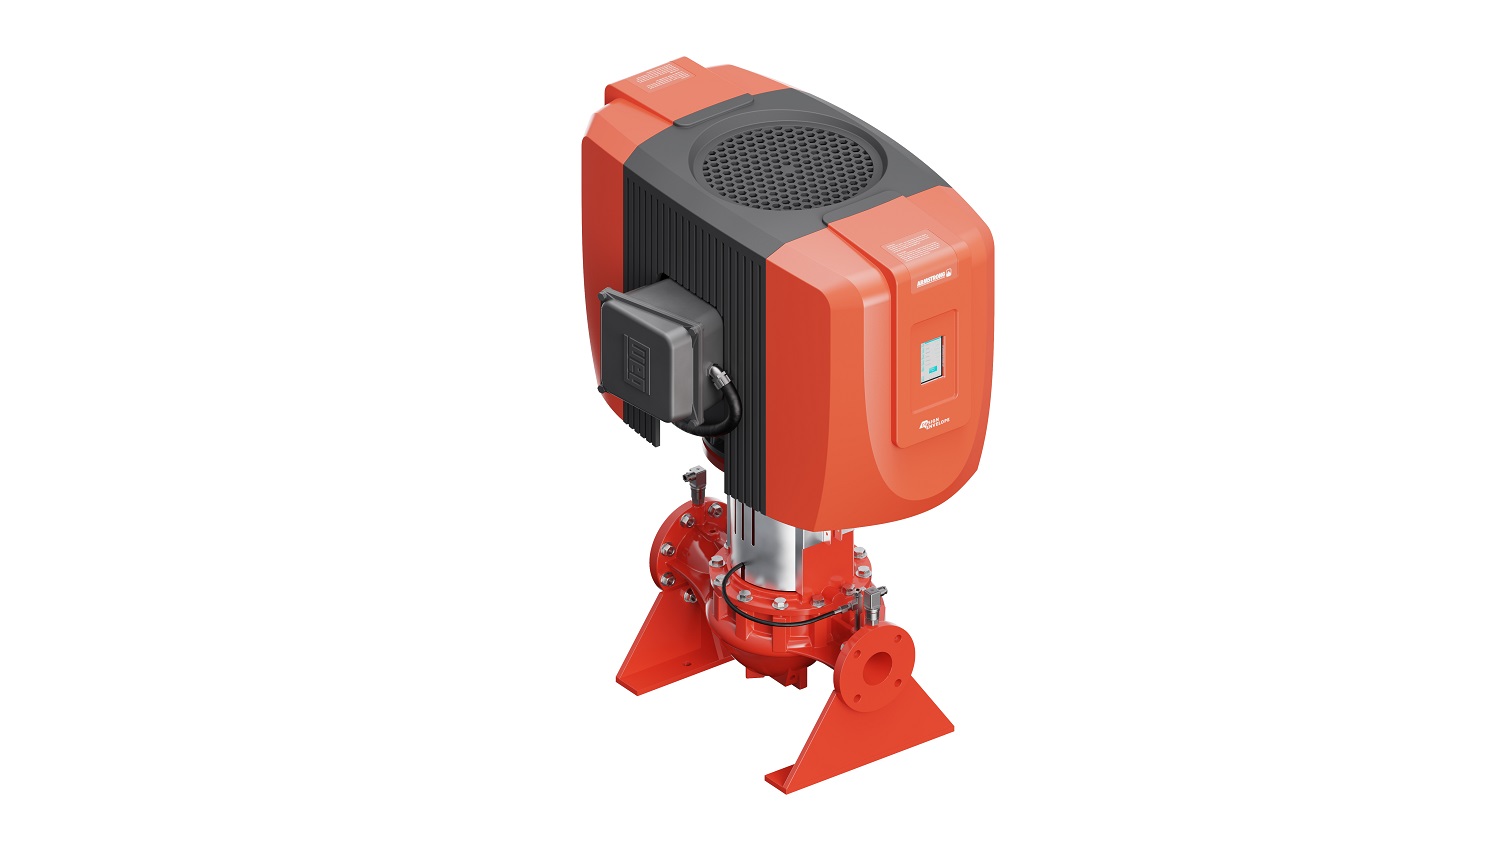 Armstrong's self-regulating variable speed fire pump which has new safety benefits.